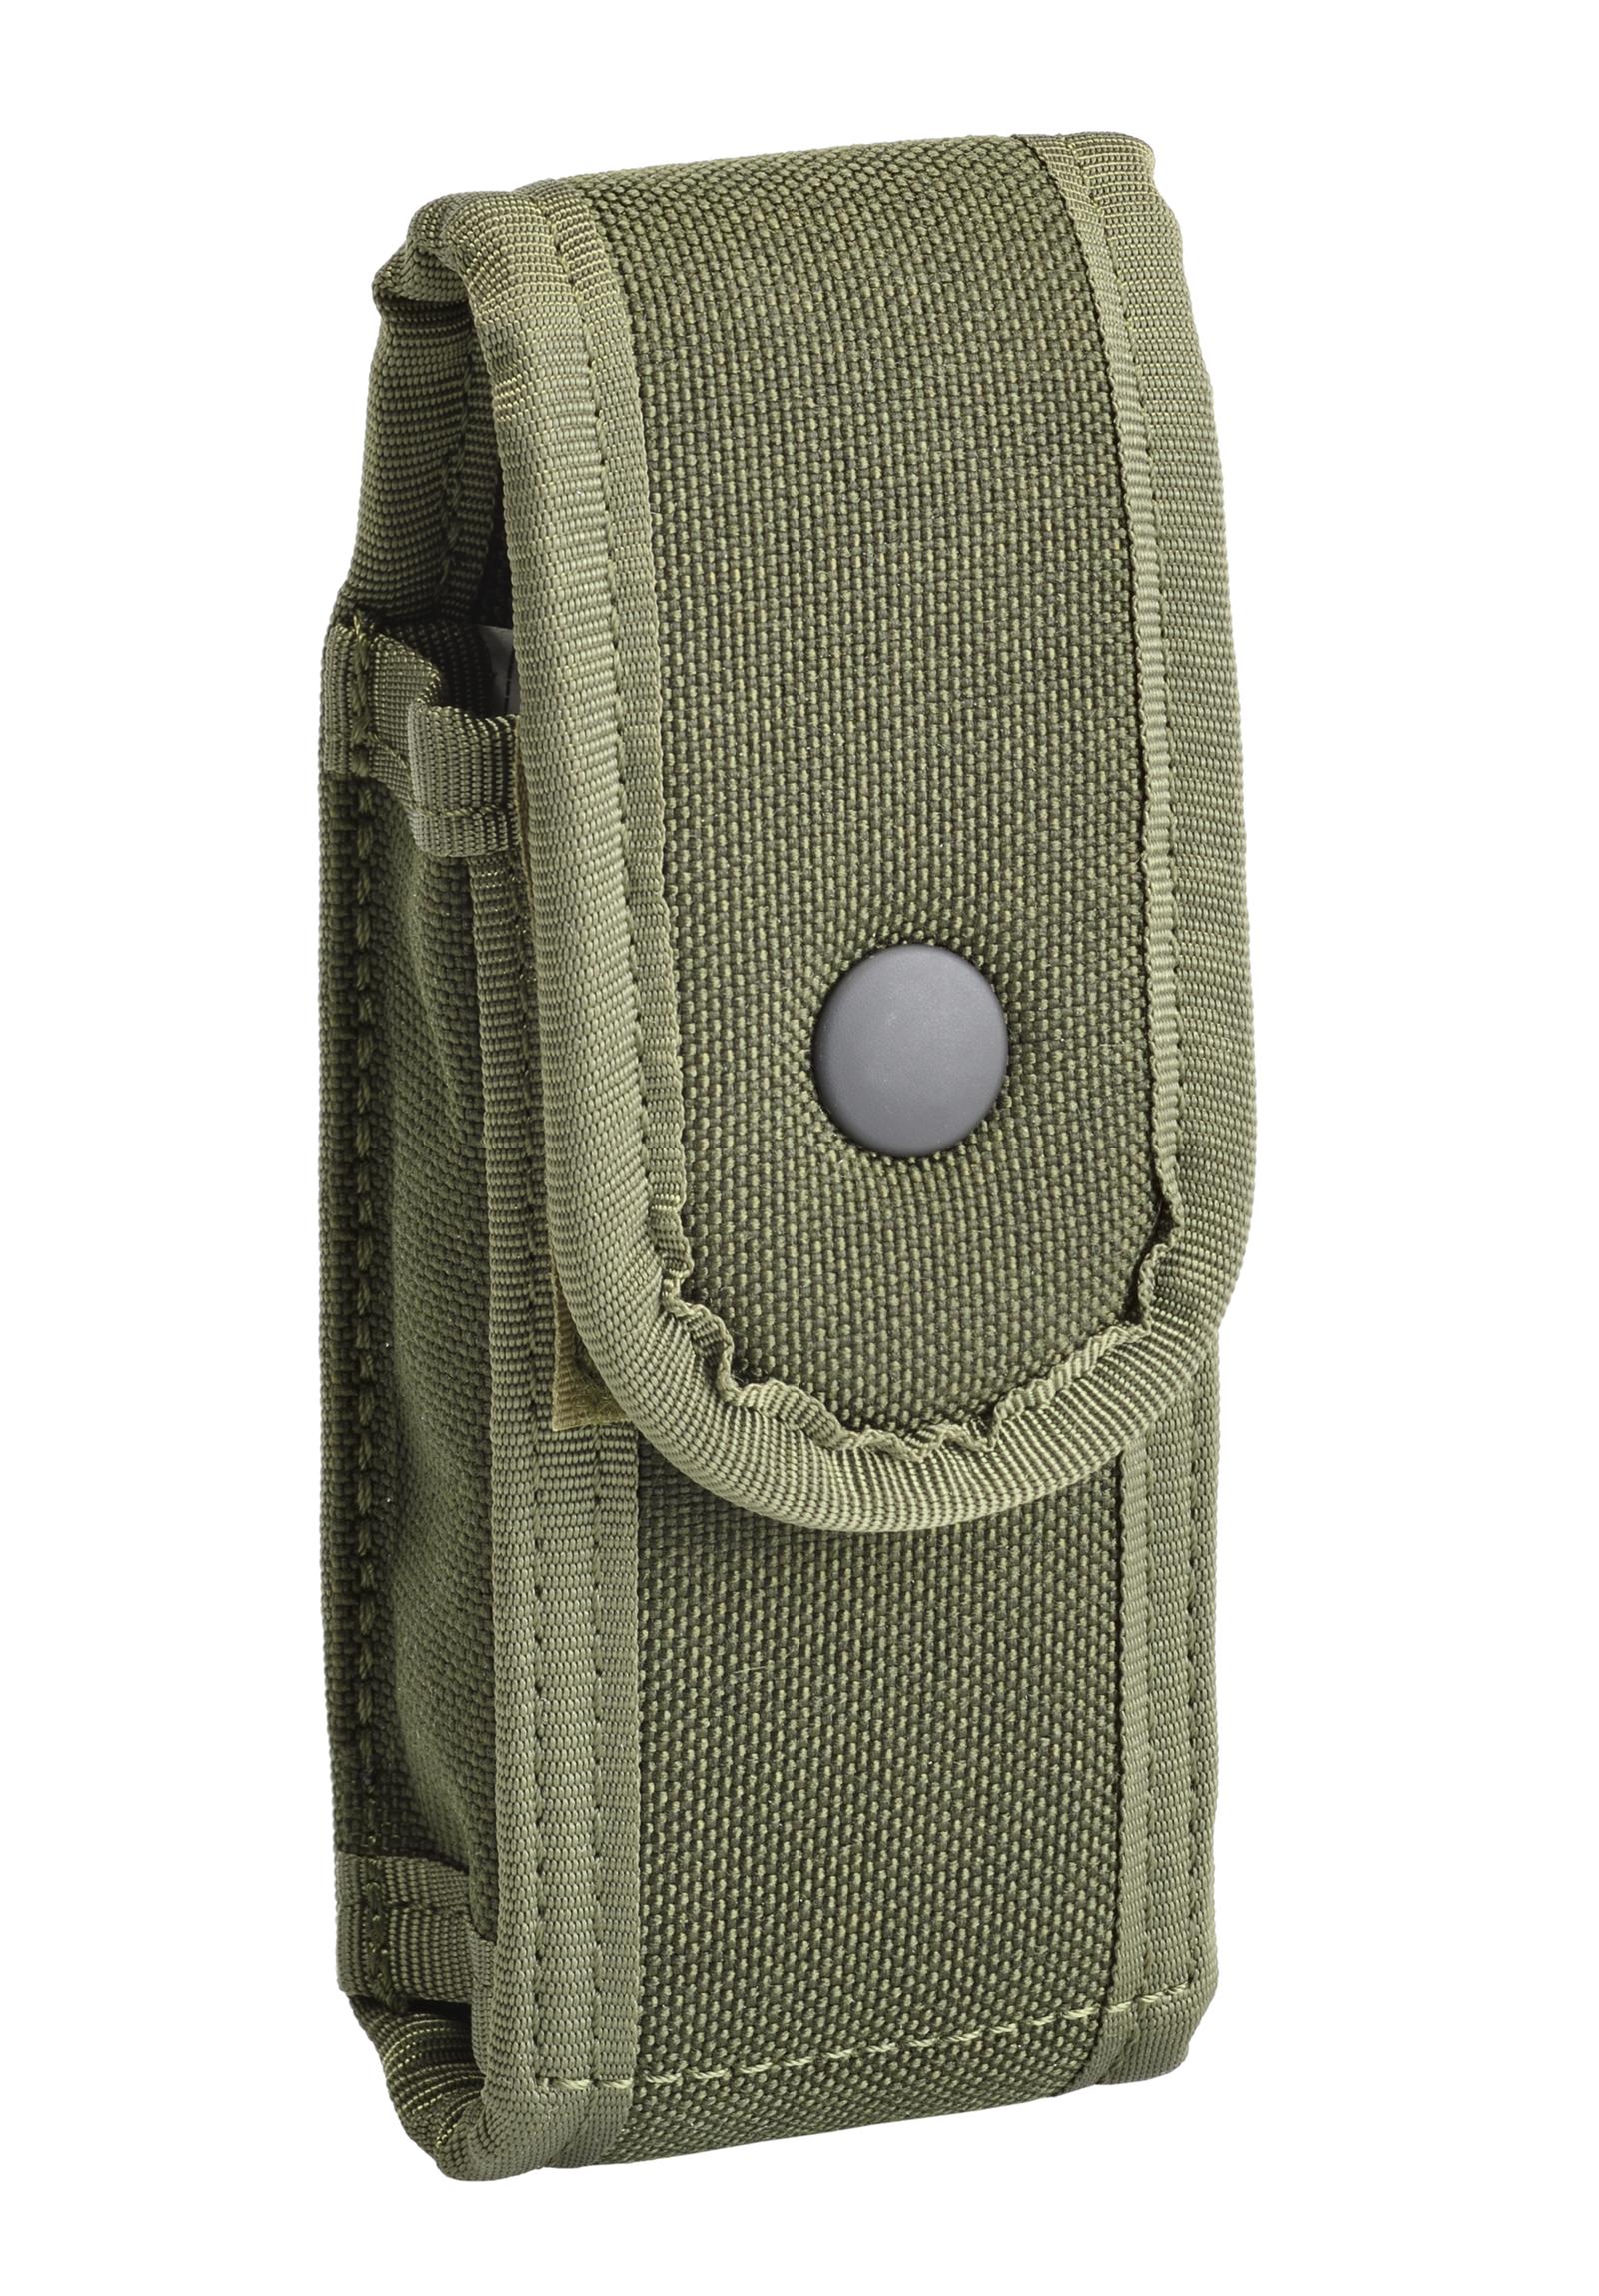 OD GREEN 92 BY FOX TACTICAL M9 Details about   DOUBLE MAGAZINE POUCH FOR BERETTA PX4 STORM 